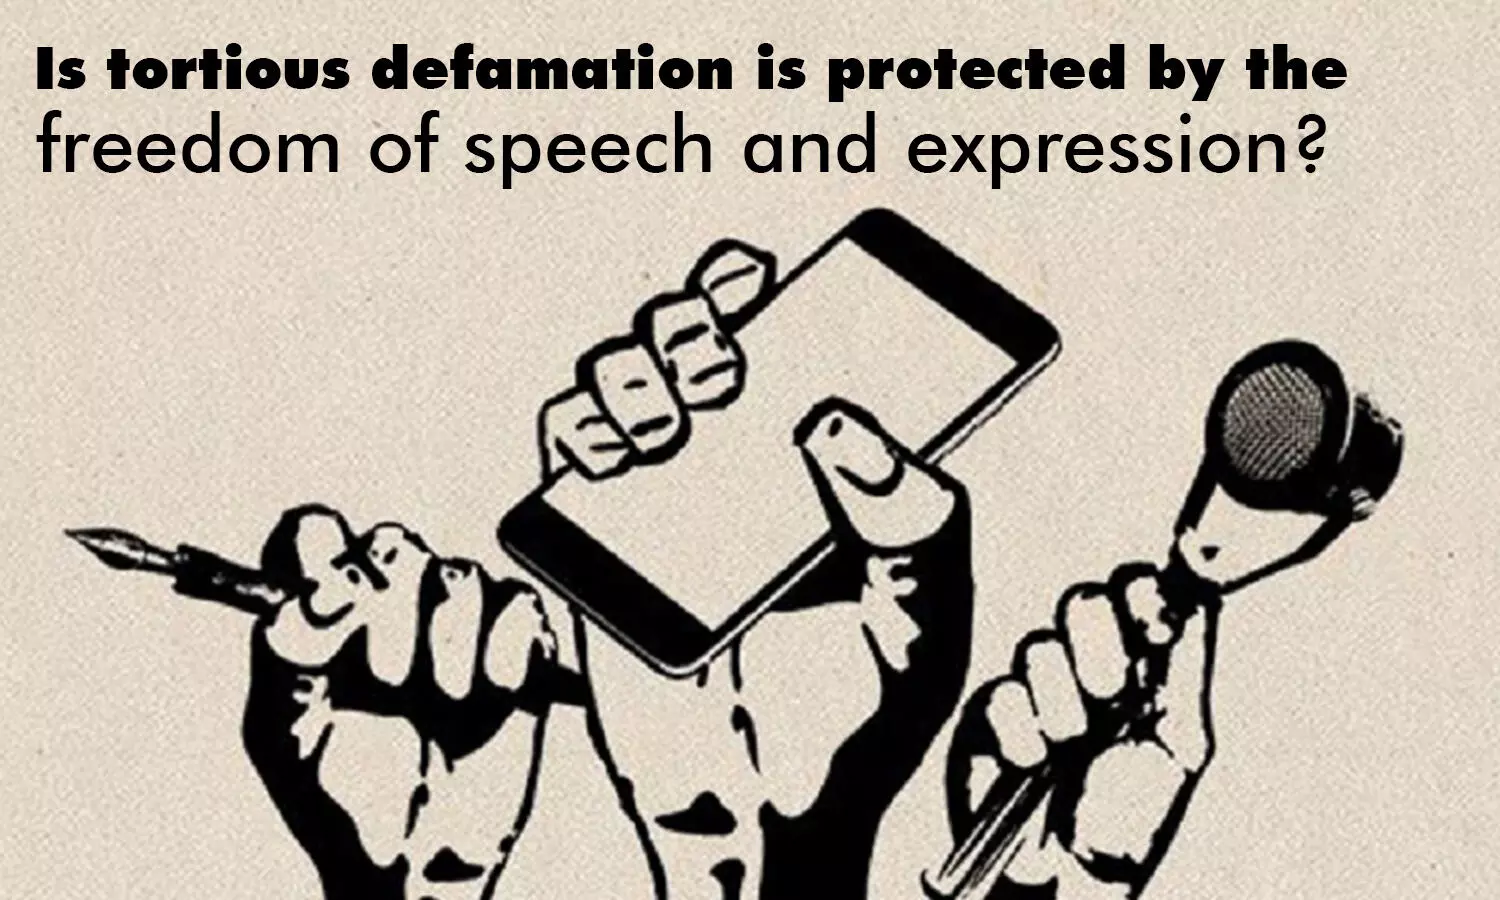 Is tortious defamation protected by the freedom of speech and expression?